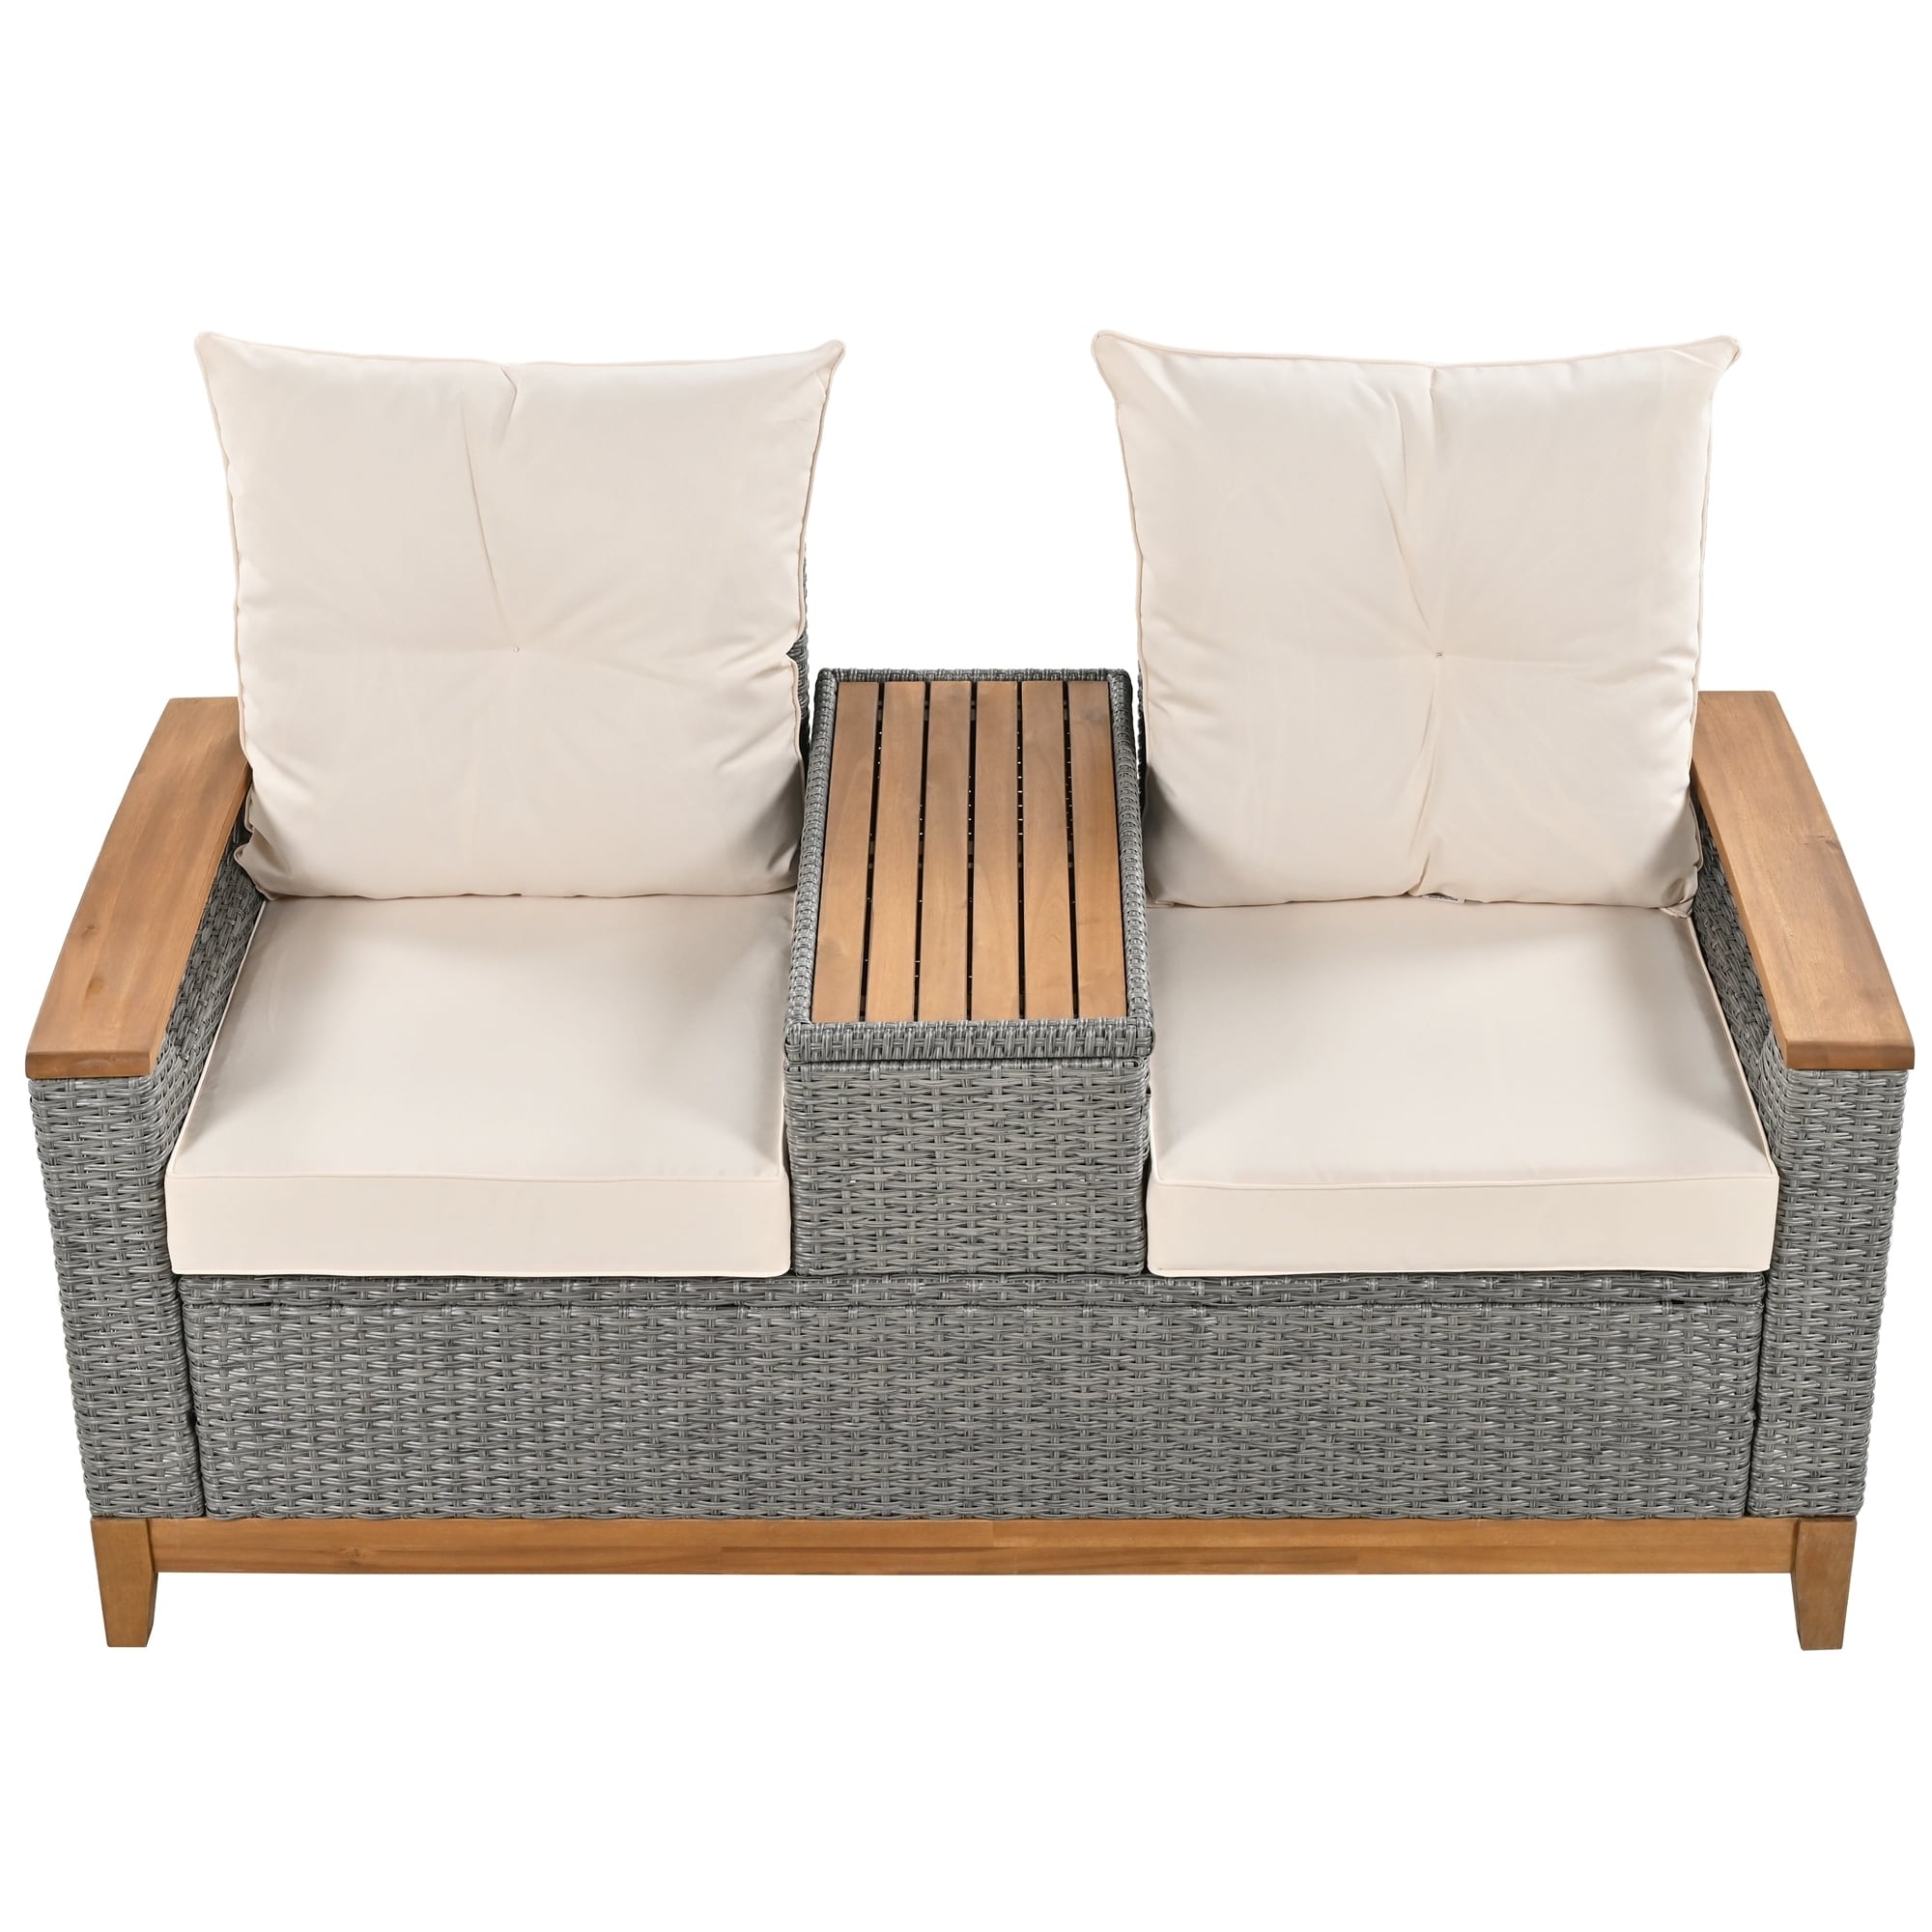 Outdoor Loveseat With Adjustable Back Angle And Armrests With Storage